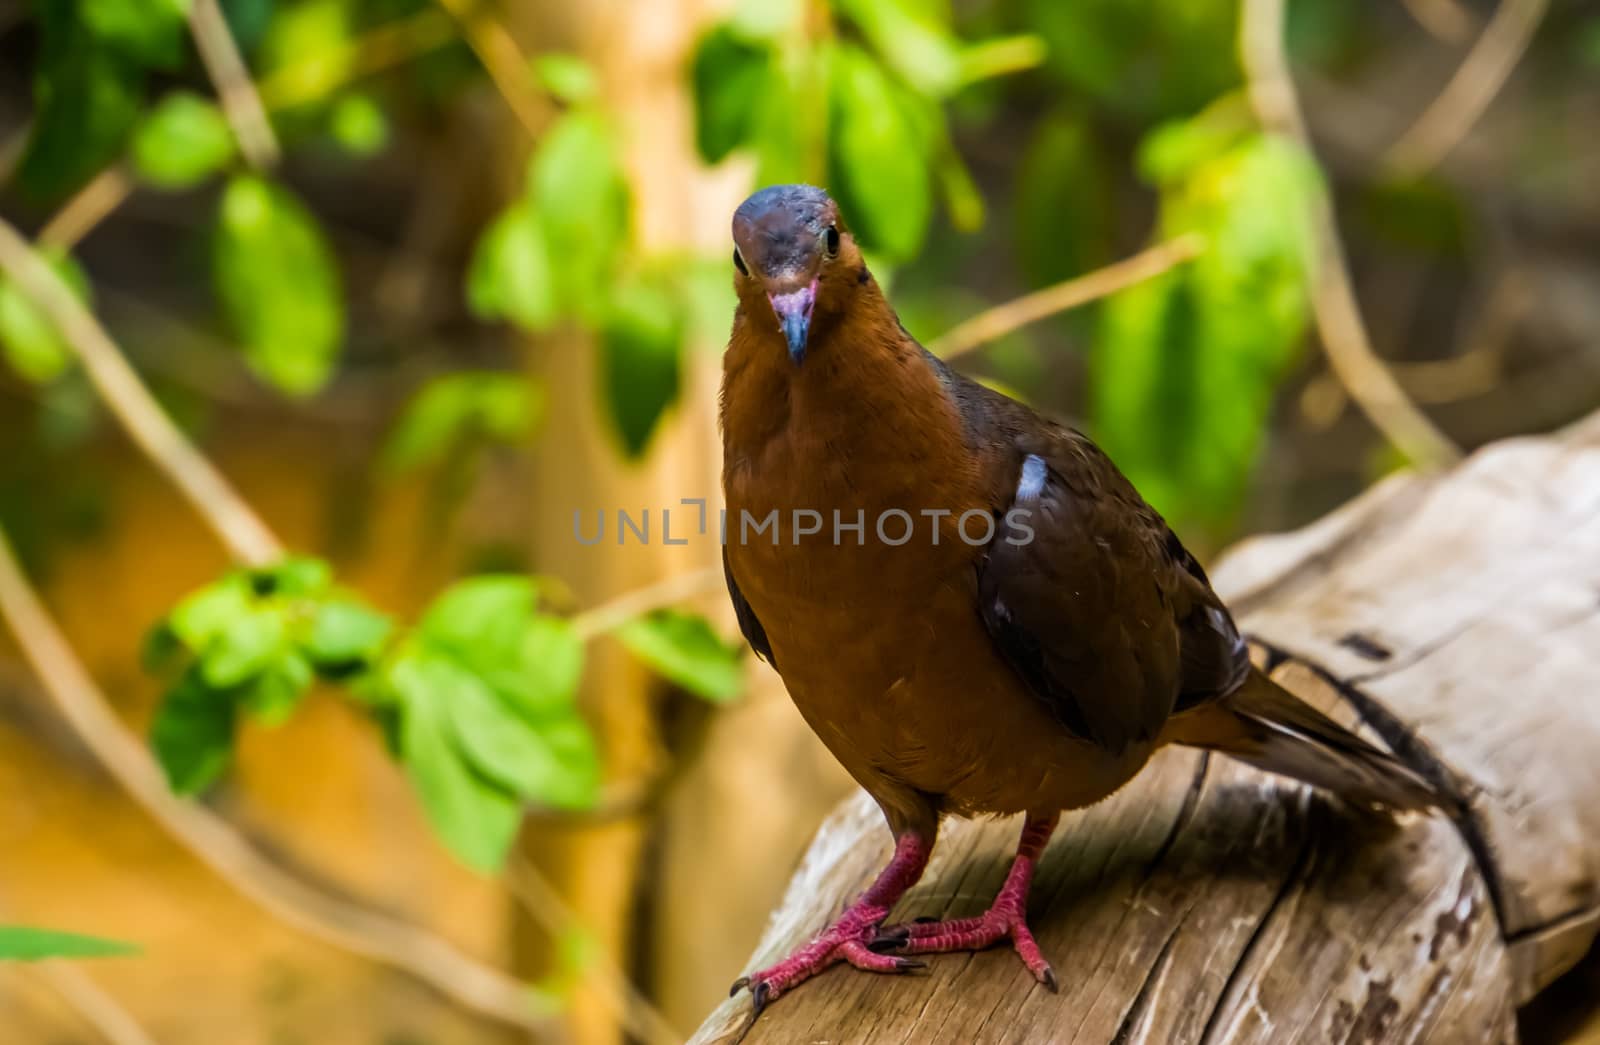 closeup portrait from the front of a socorro dove, Pigeon that is extinct in the wild, Tropical bird specie that lived on socorro island, Mexico